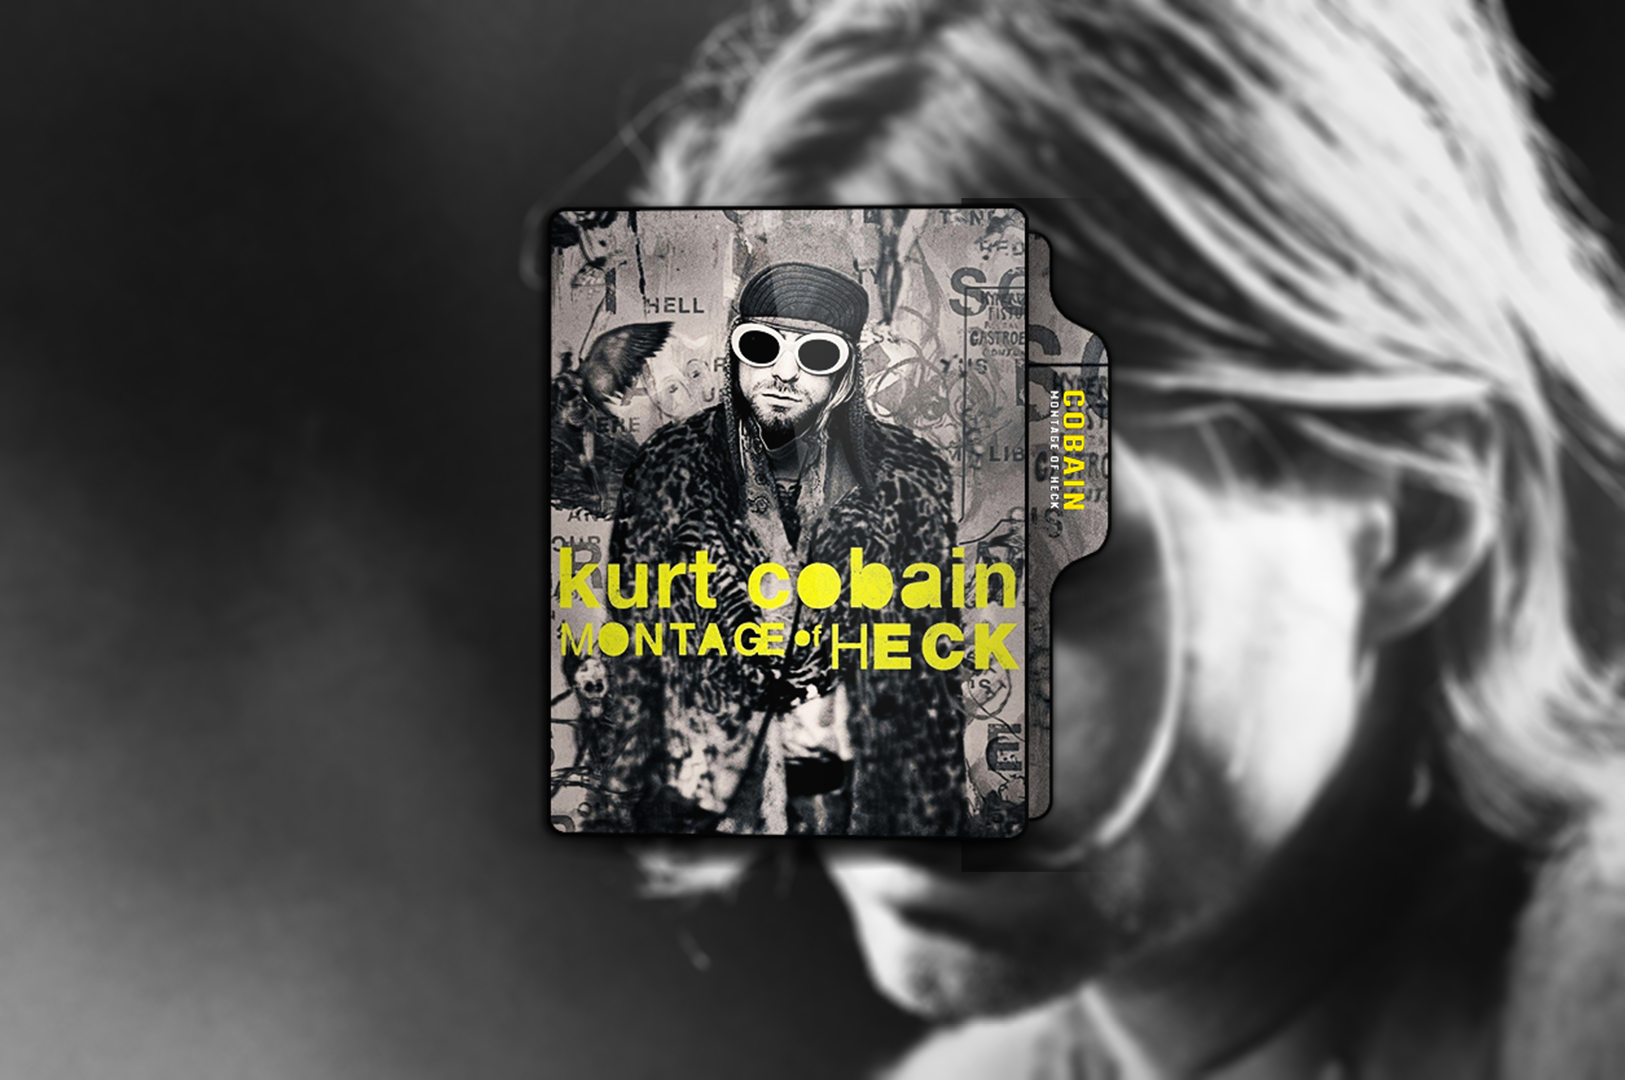 Cobain: Montage of Heck –